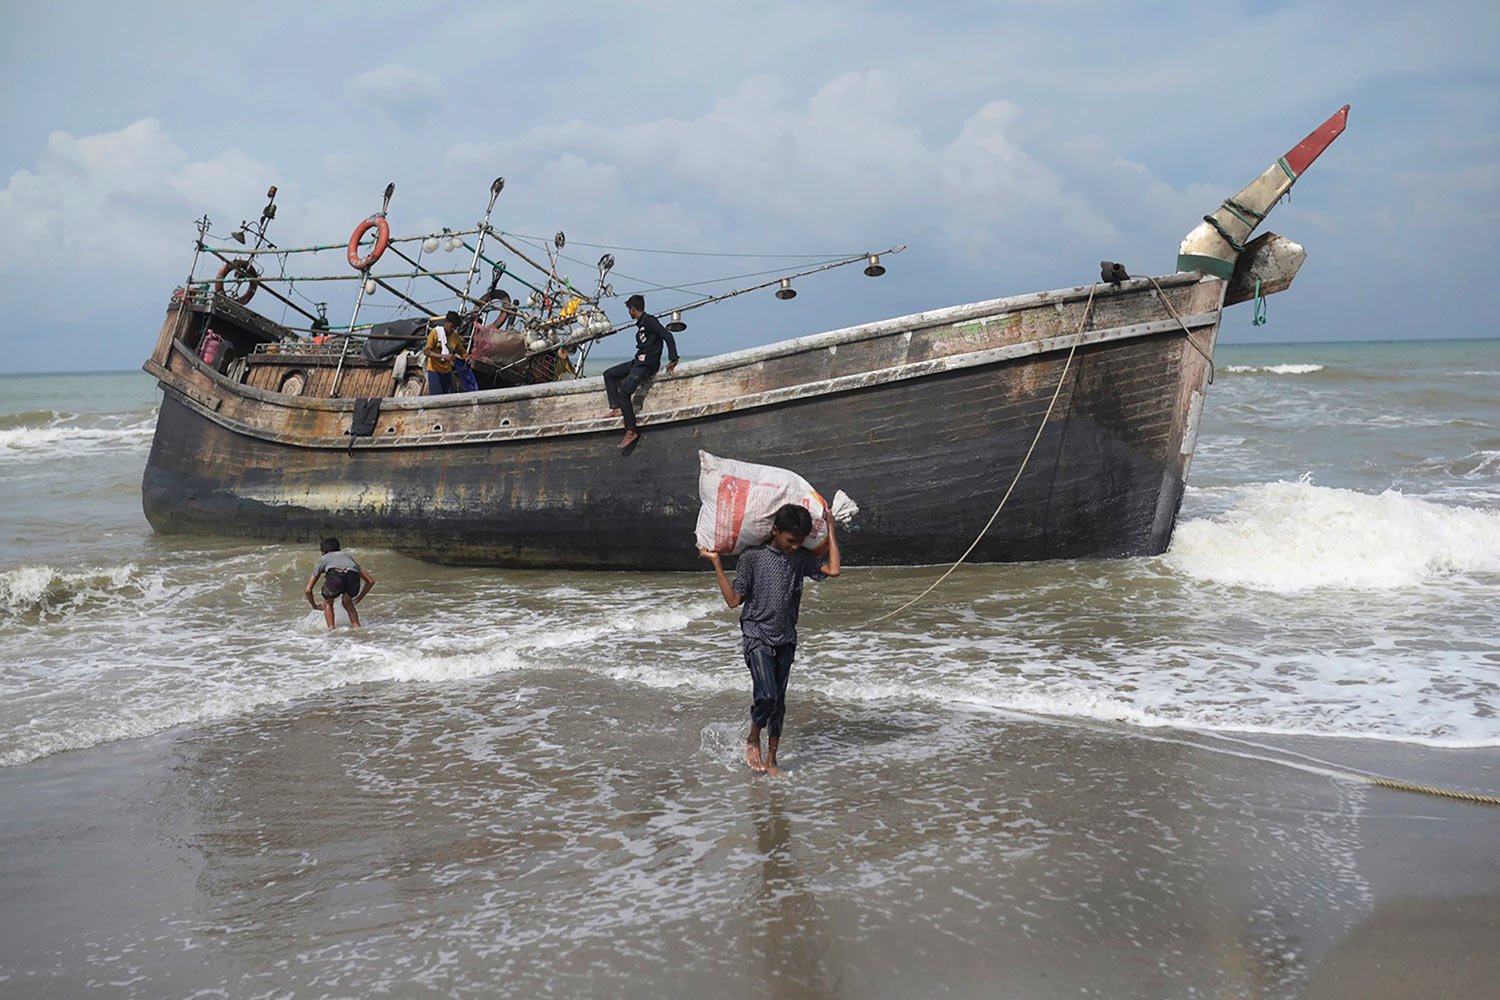  Ethic Rohingya people collect belongings from their boat after landing on Lampanah Leungah beach in Aceh Besar, Aceh province, Indonesia, Thursday, Feb. 16, 2023. (AP Photo/Riska Munawarah) 